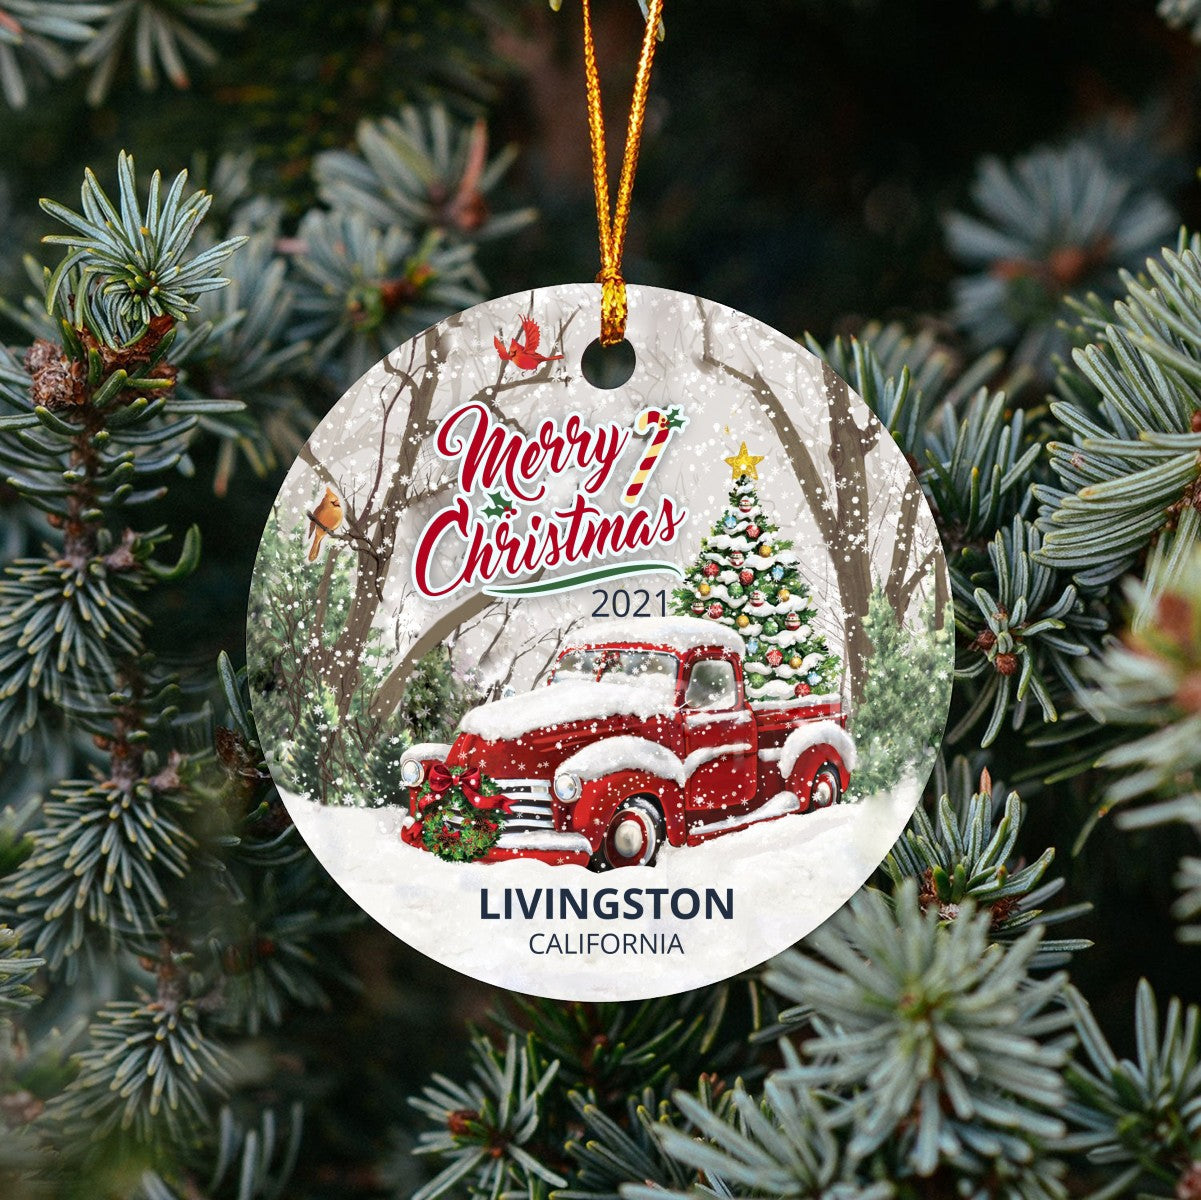 Christmas Tree Ornaments Livingston - Ornament With Name City, State Livingston California CA Ornament - Red Truck Xmas Ornaments 3'' Plastic Gift For Family, Friend And Housewarming